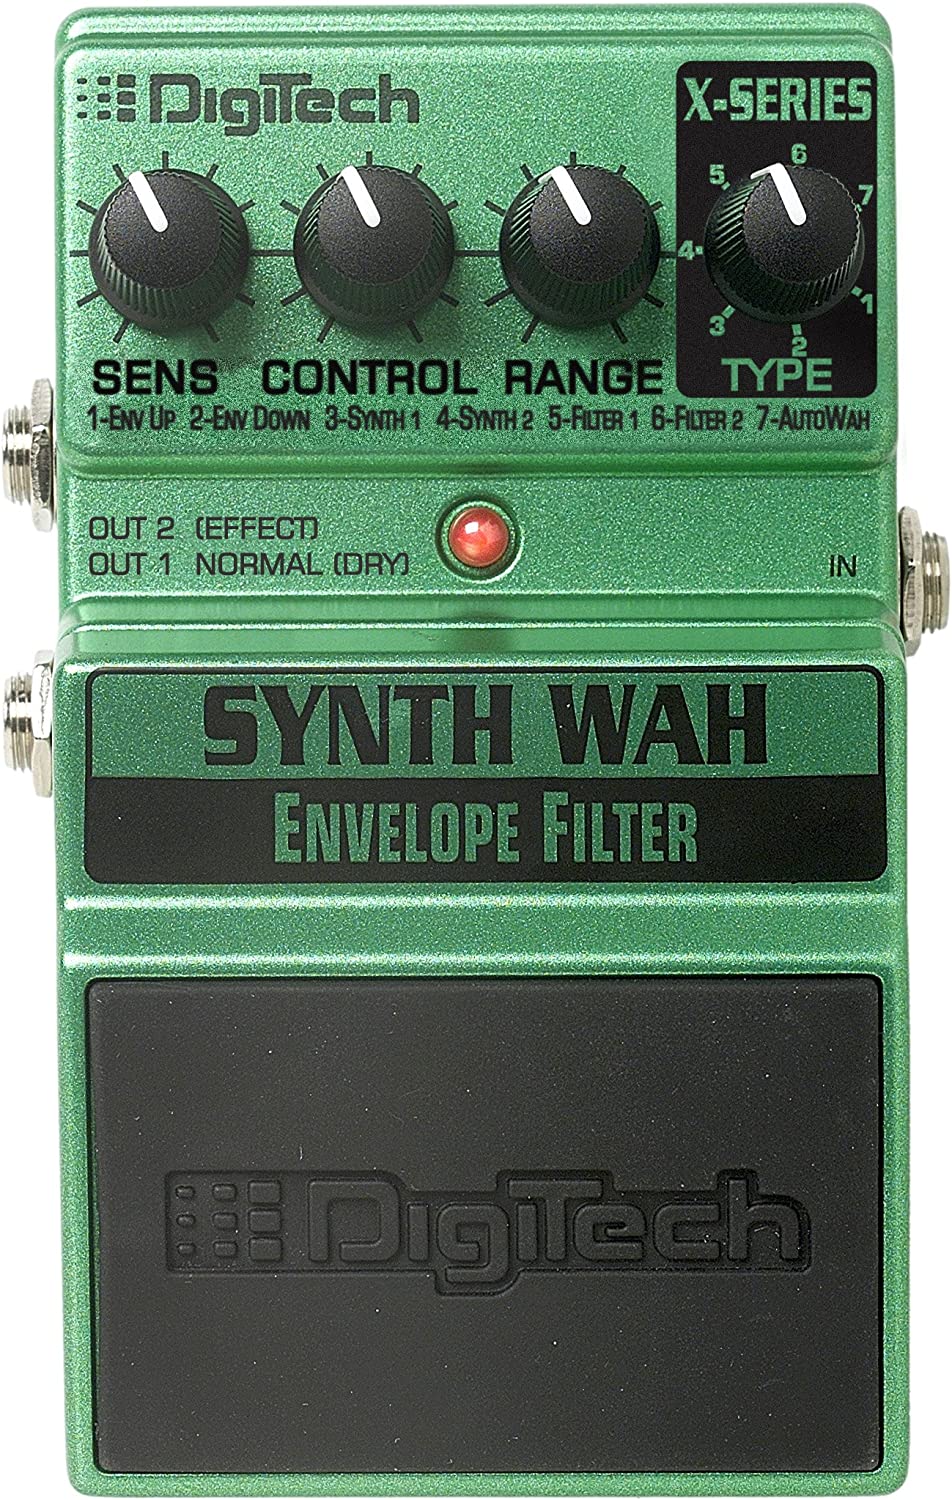 Digitech XSW Synth Wah Envelope Filter Guitar Pedal on a white background